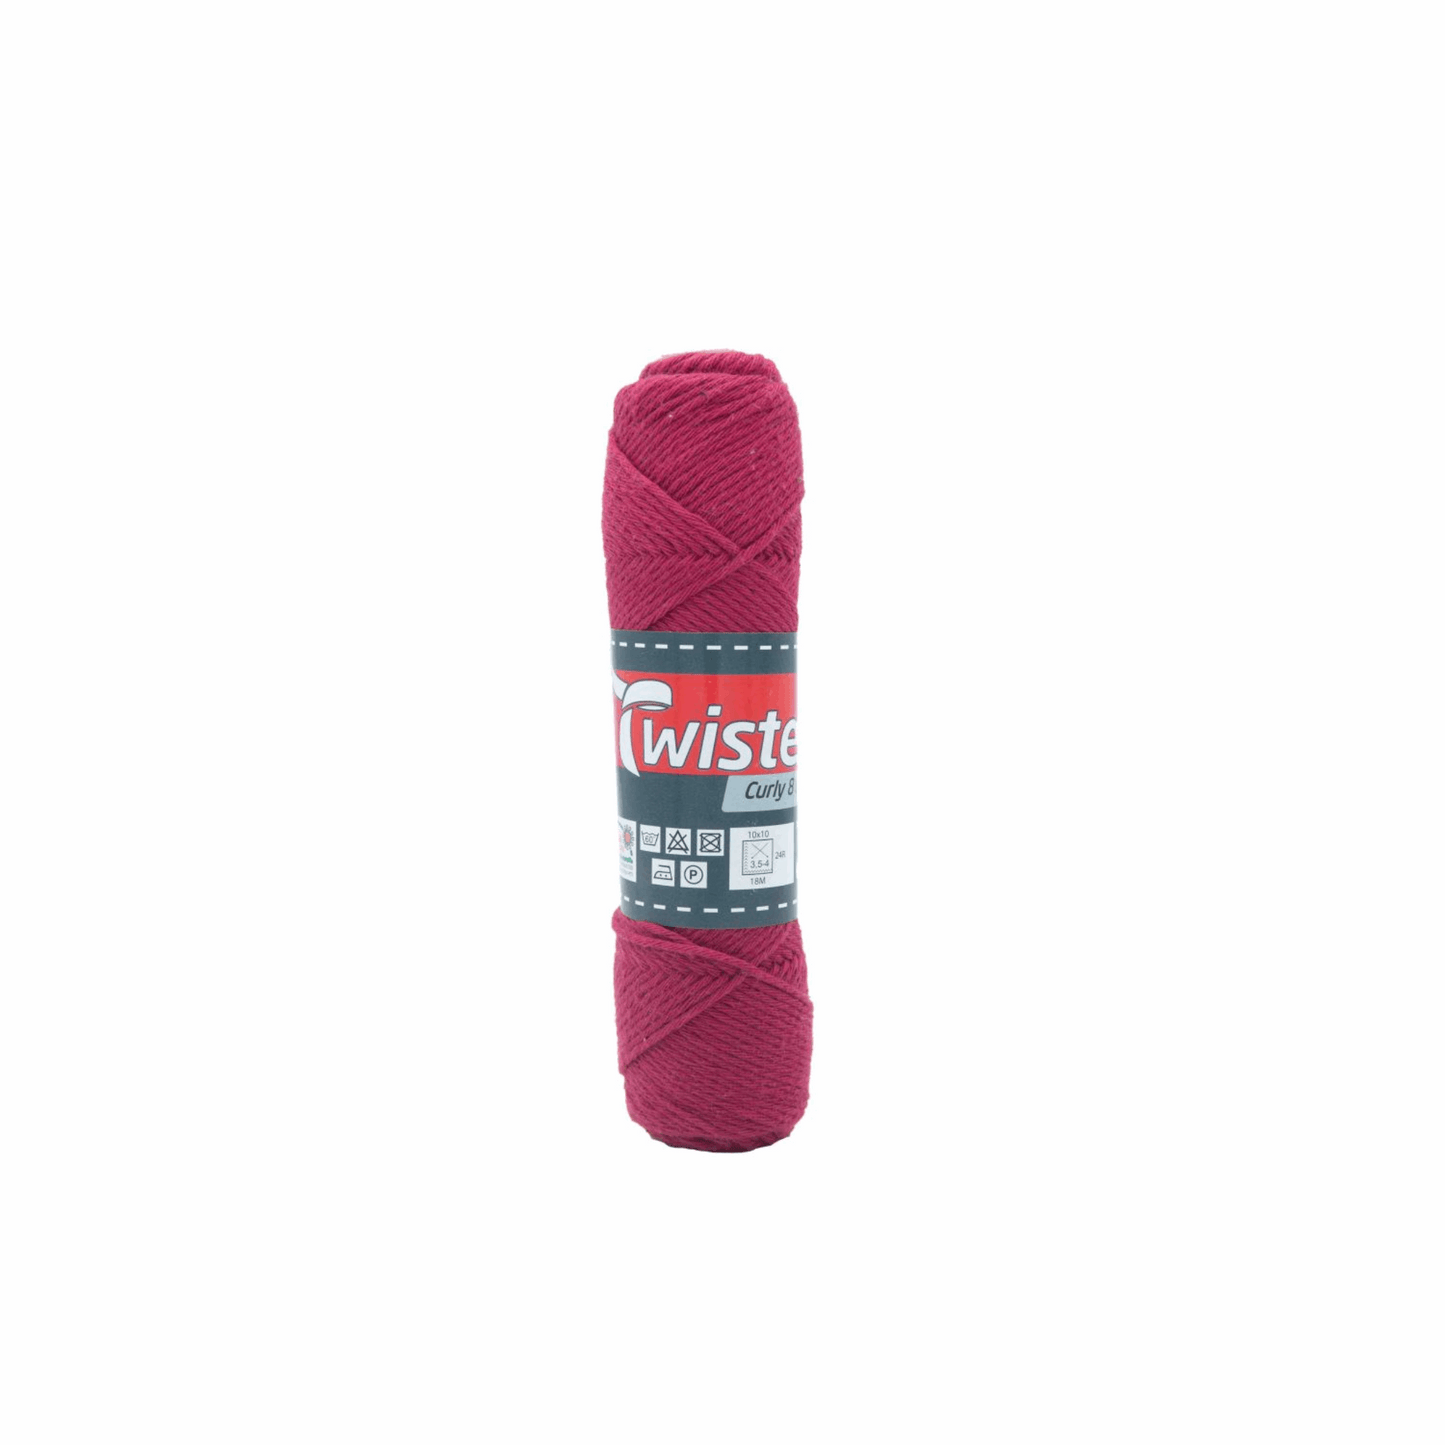 Twister Curly 8 50g, Bordeaux, 98302, Farbe 37